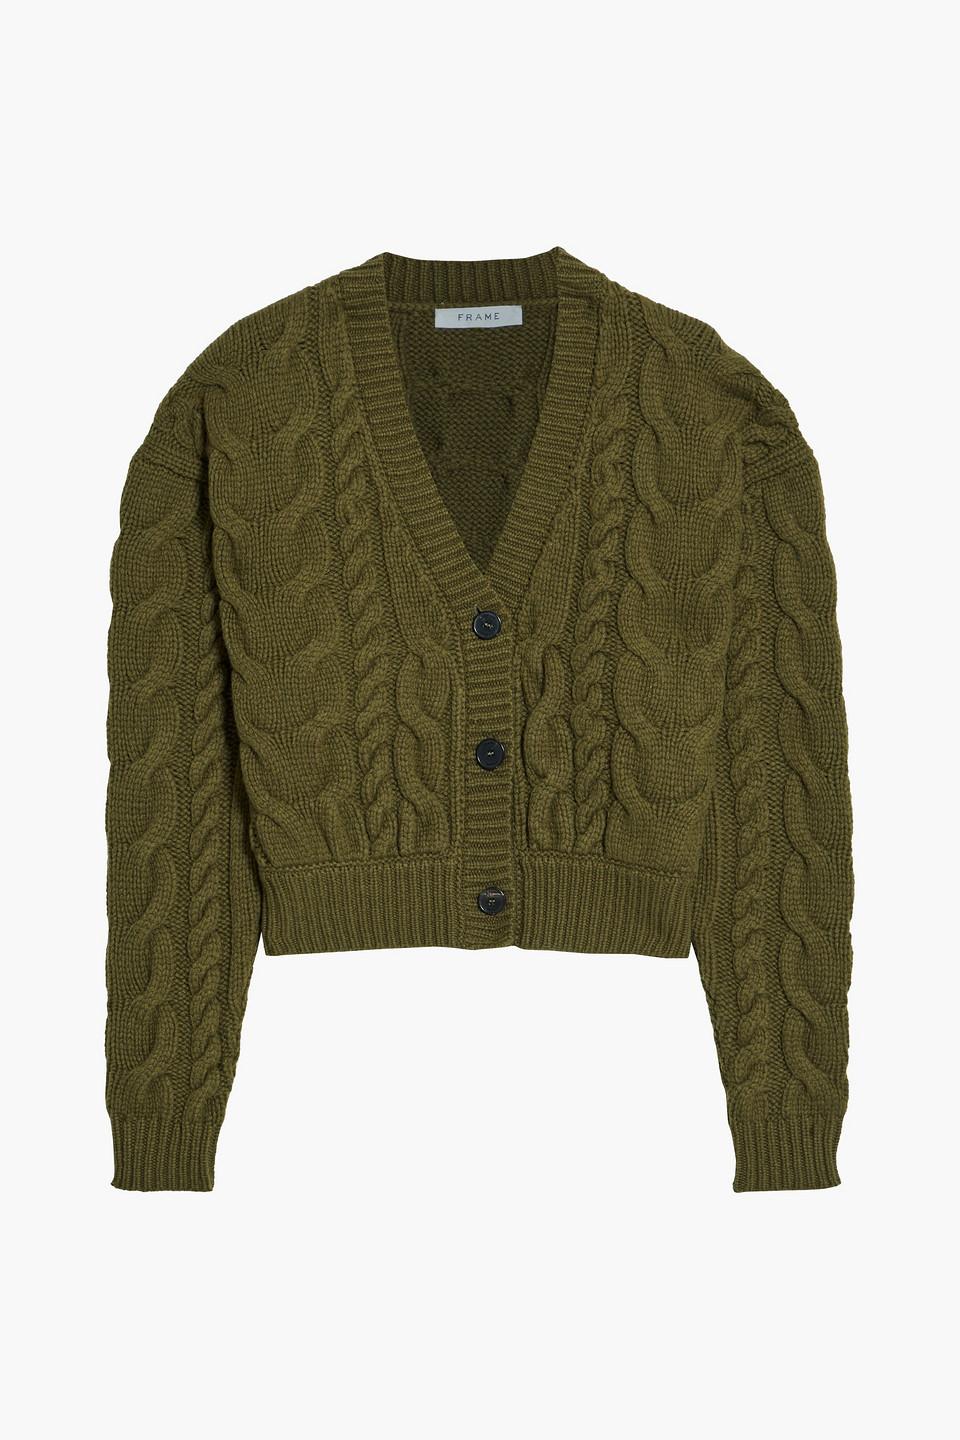 FRAME Cable-knit Merino Wool Cardigan in Green | Lyst